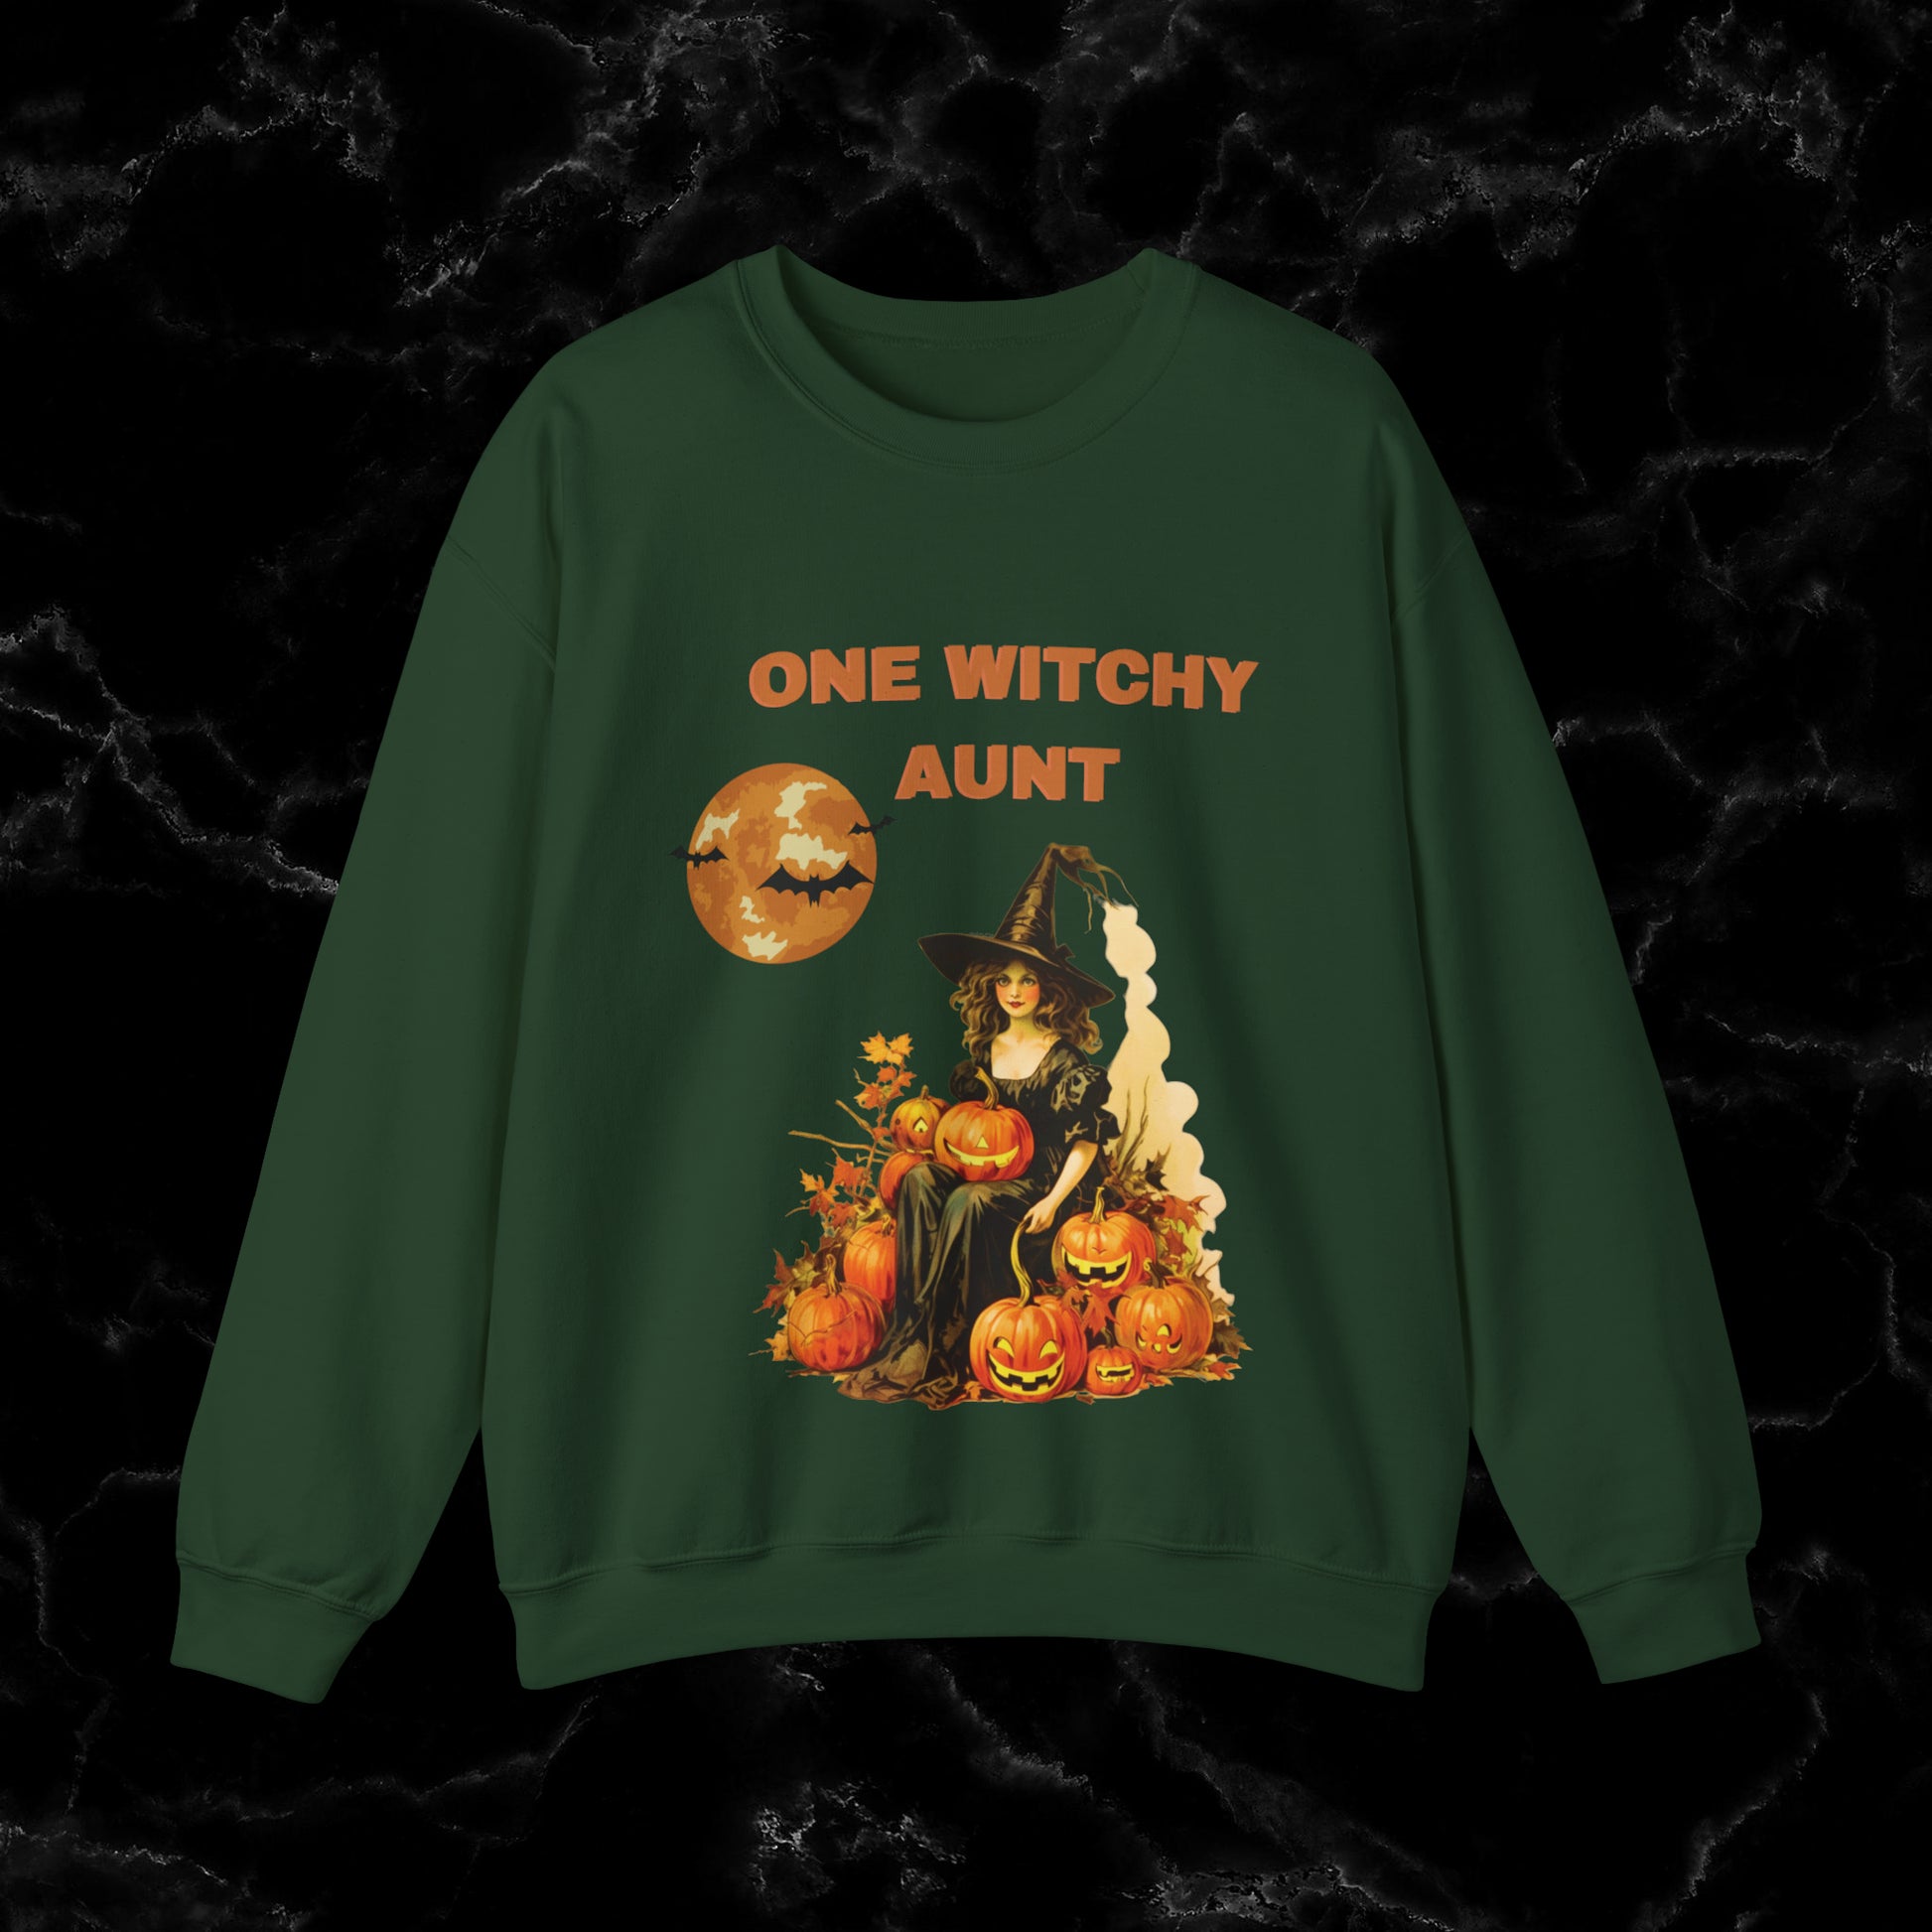 One Witchy Aunt Sweatshirt - Cool Aunt Shirt, Feral Aunt Sweatshirt, Perfect Gifts for Aunts Halloween Sweatshirt S Forest Green 